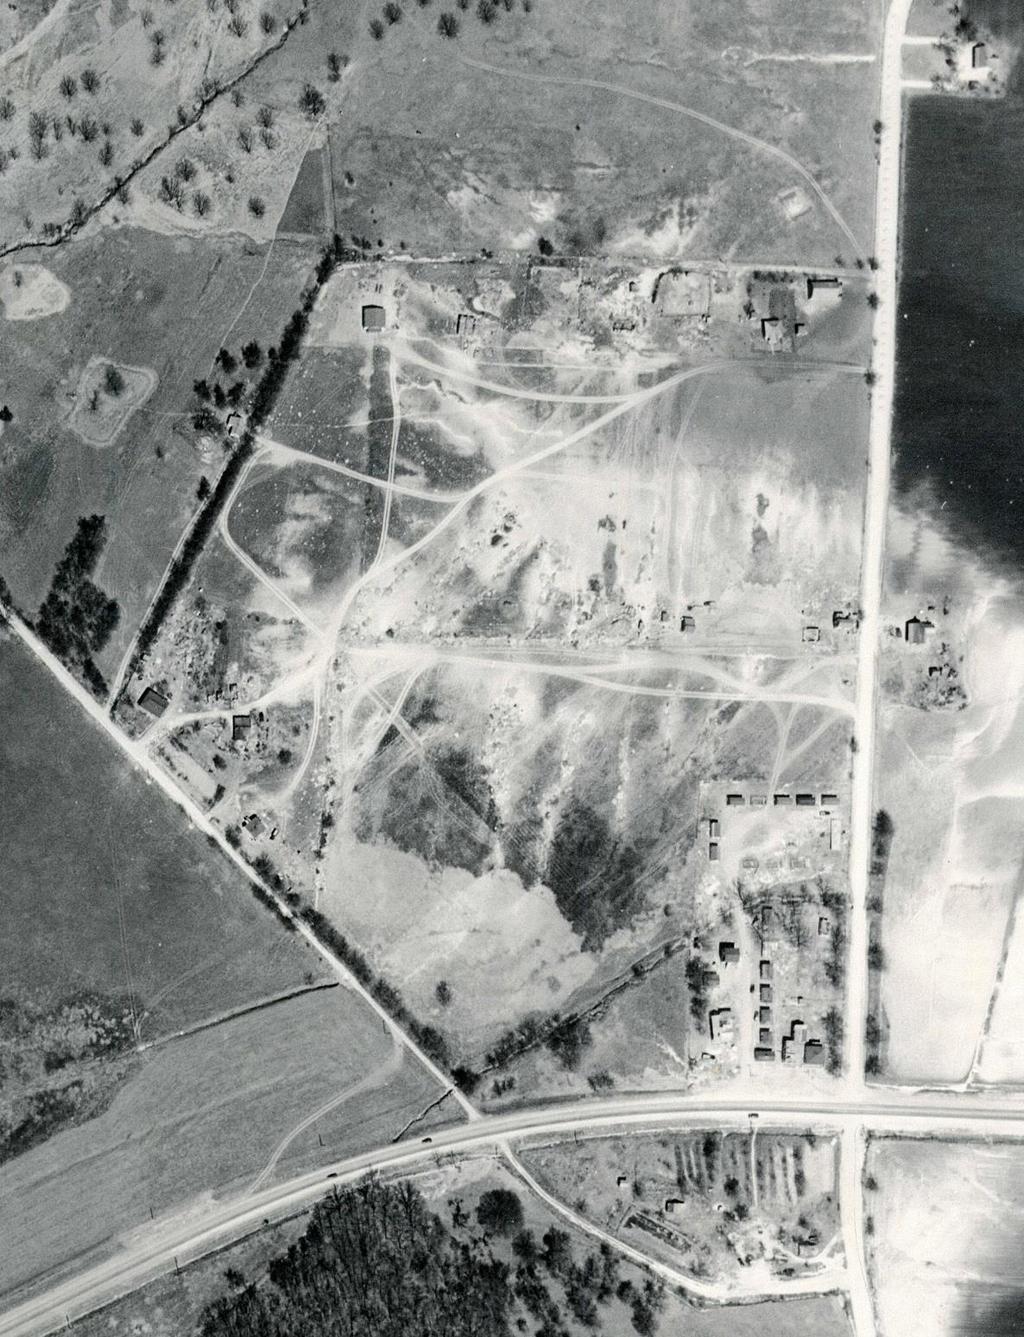 FIGURE 4. This 1951 agricultural survey map shows the accelerating growth of the Egypt s development. The red arrow indicates the location of the North Loop Motel, and possibly a dance hall.